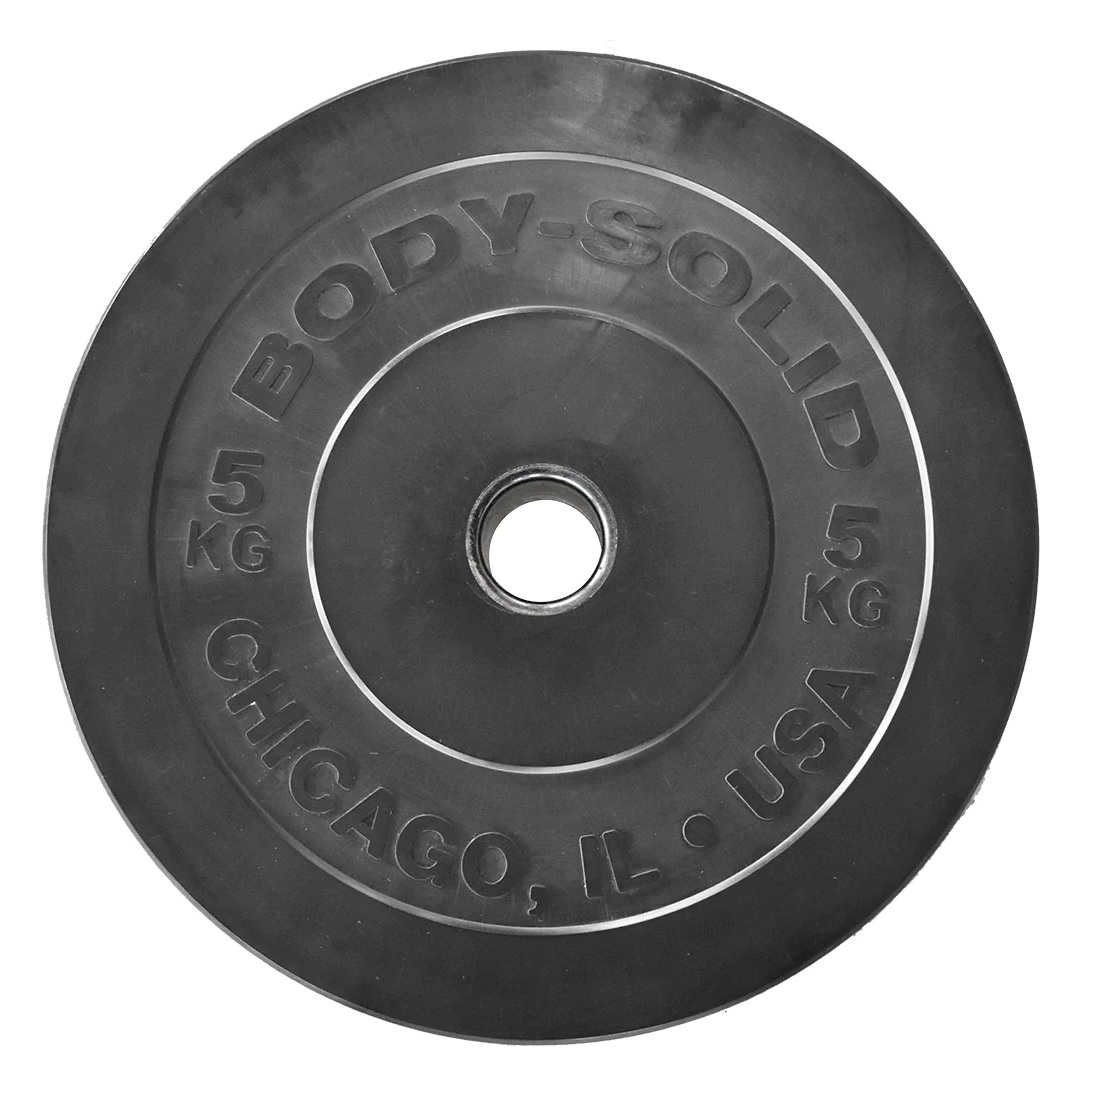  Disque Chicago Olympic Bumper Plate 5 kg Bodysolid - FitnessBoutique